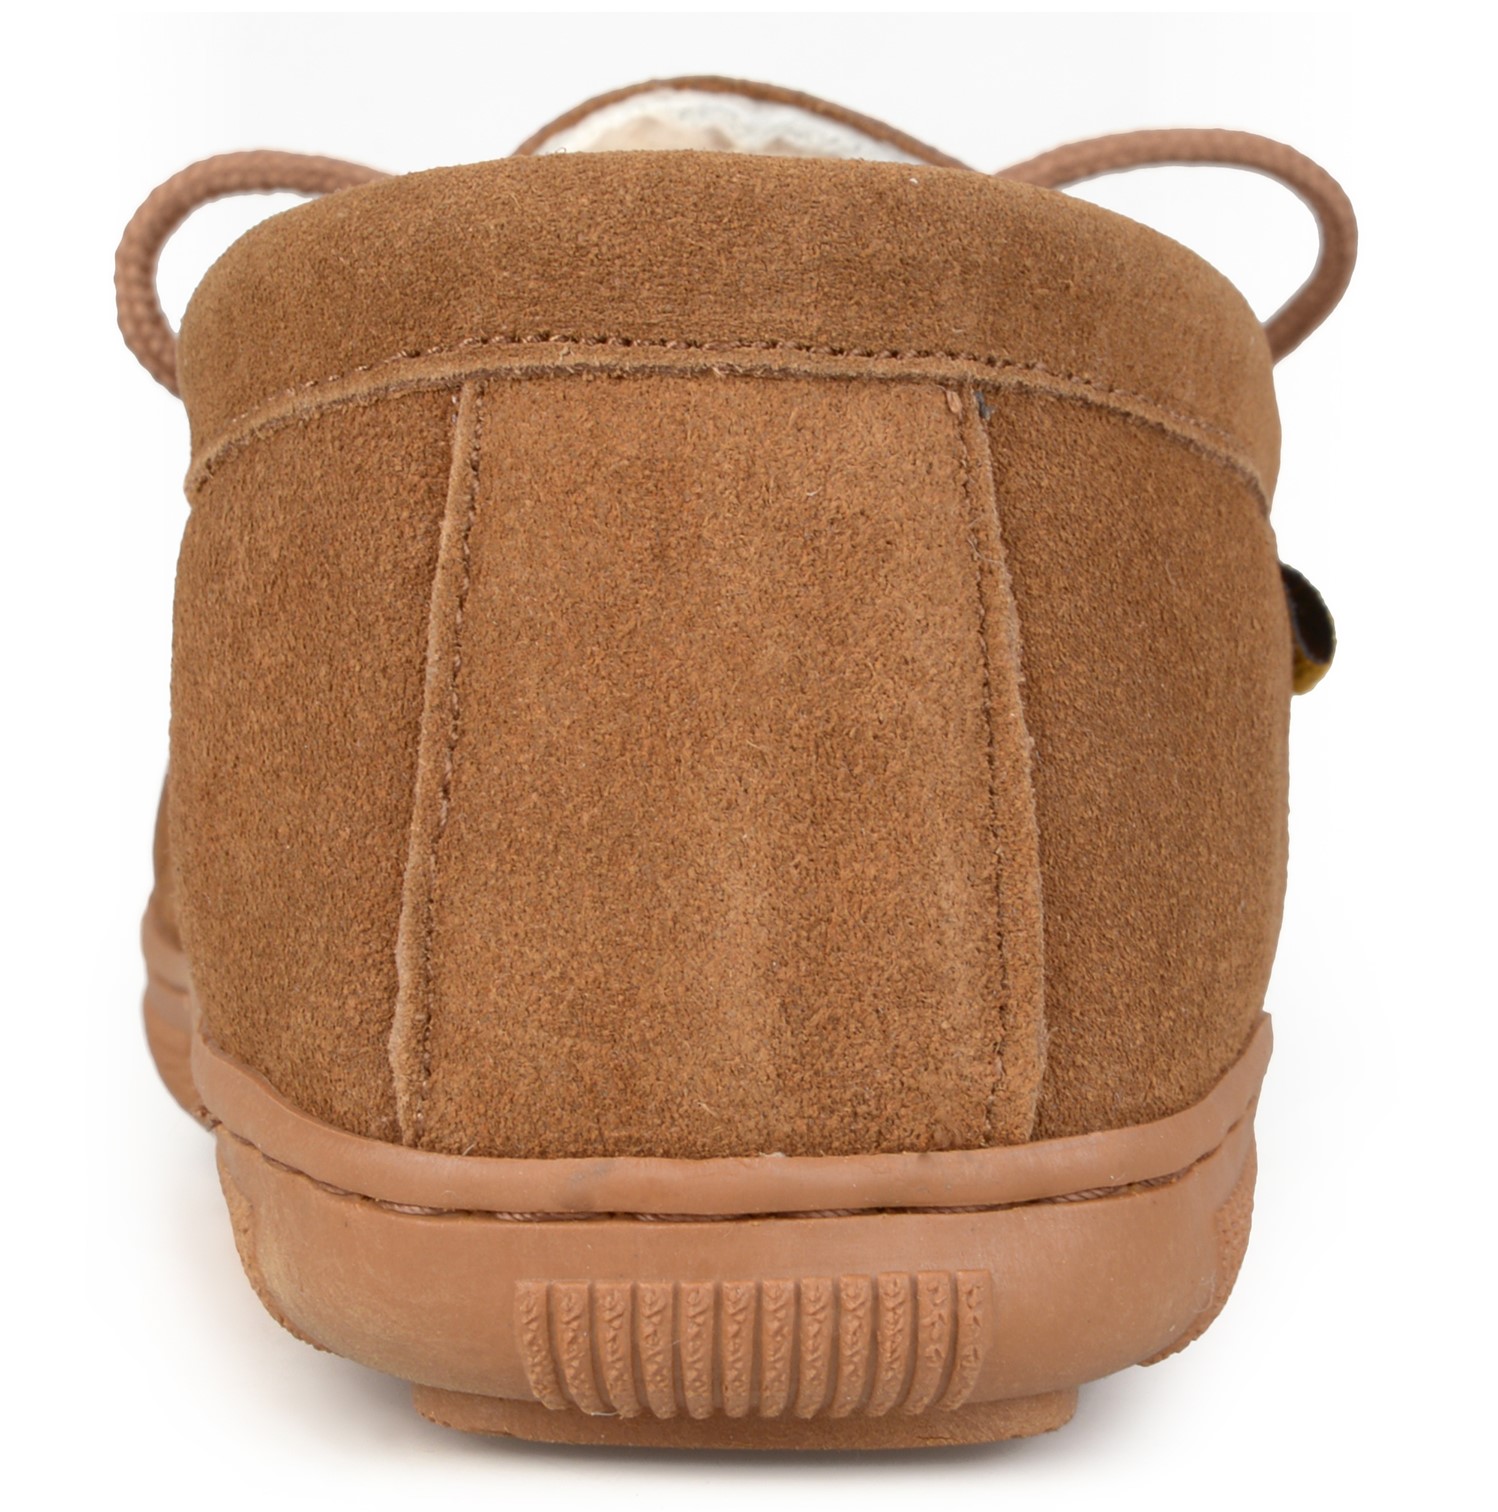 Daxx Men's Hank Leather Moccasin Slipper - image 4 of 6